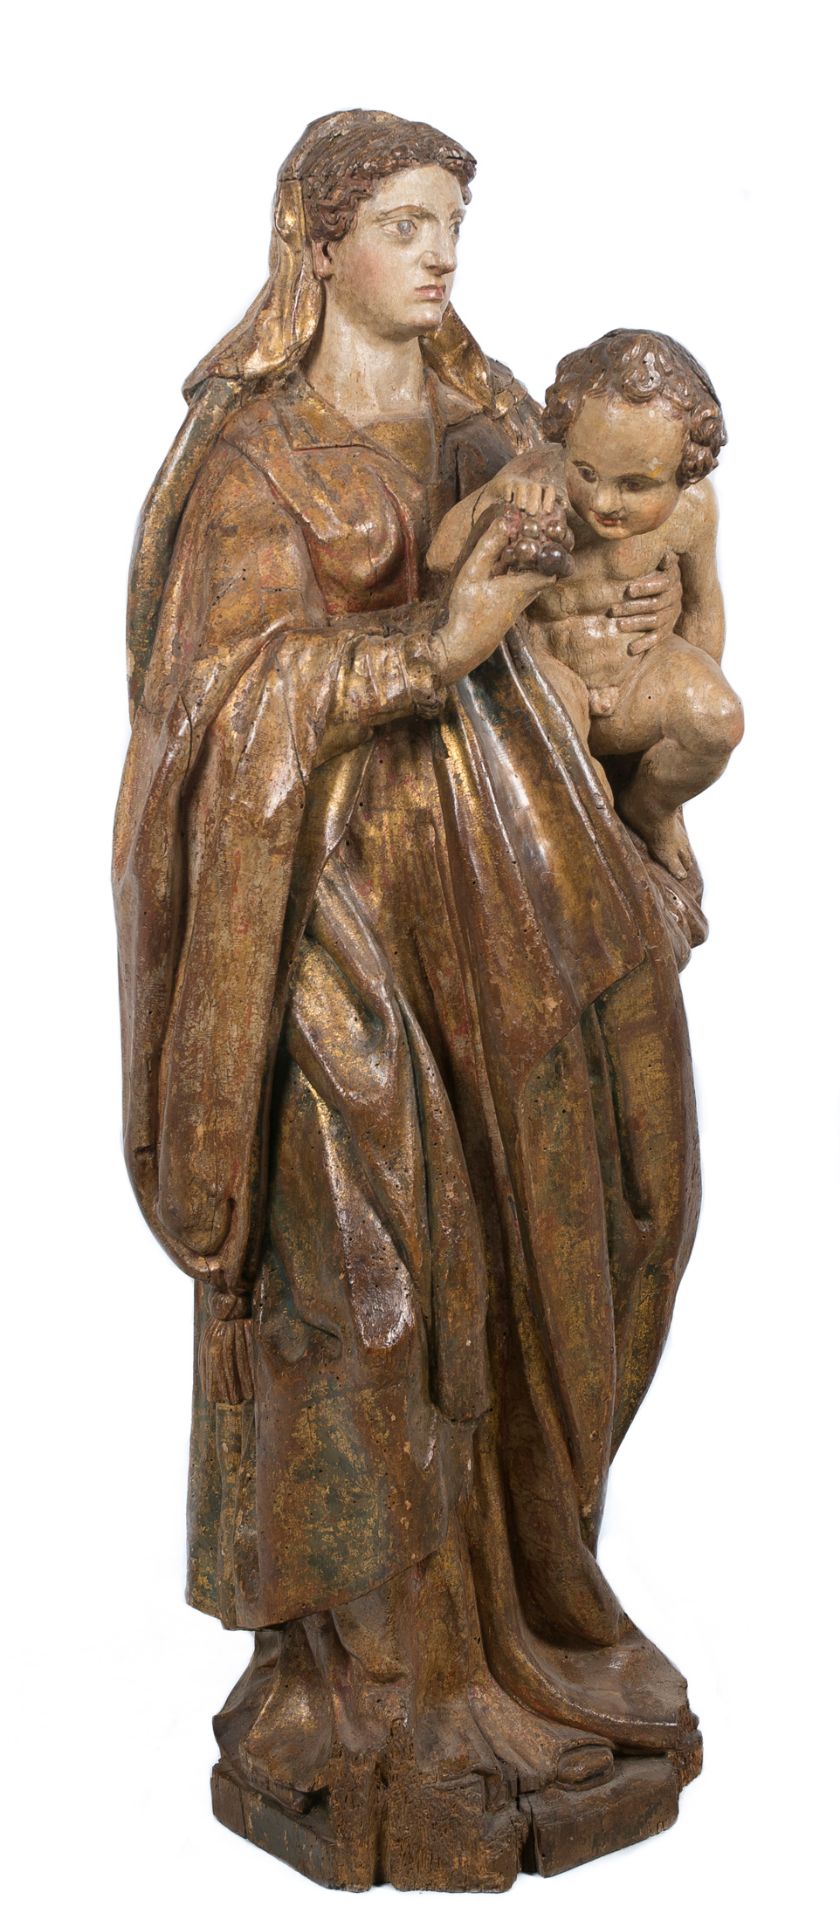 "Madonna and Child". Carved, gilded and polychromed wooden sculpture. Castilian School. 16th centu - Image 2 of 3